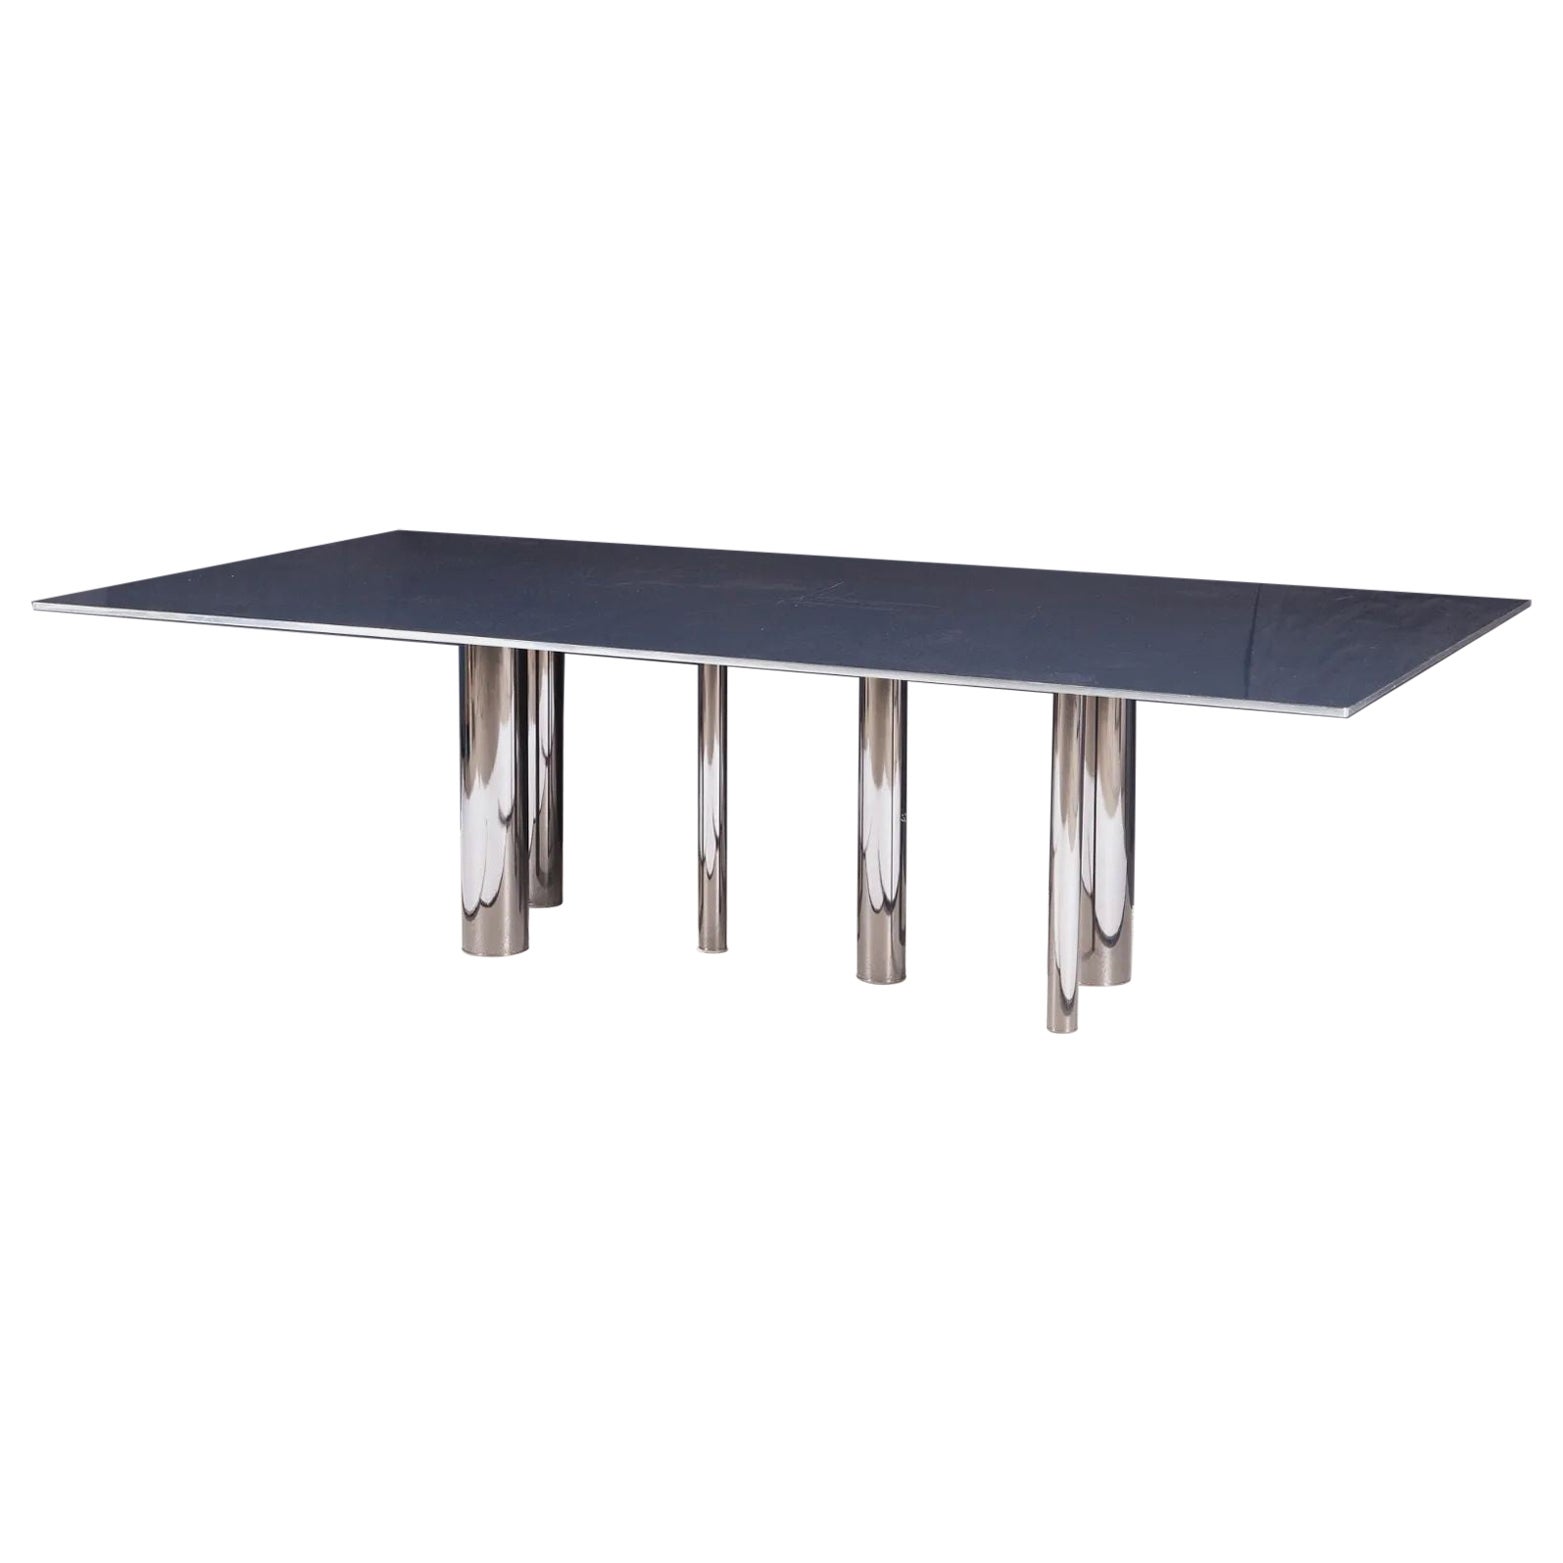 Martin Szekely, Contemporary, Limited Edition Dining Table, Steel, France, 2004